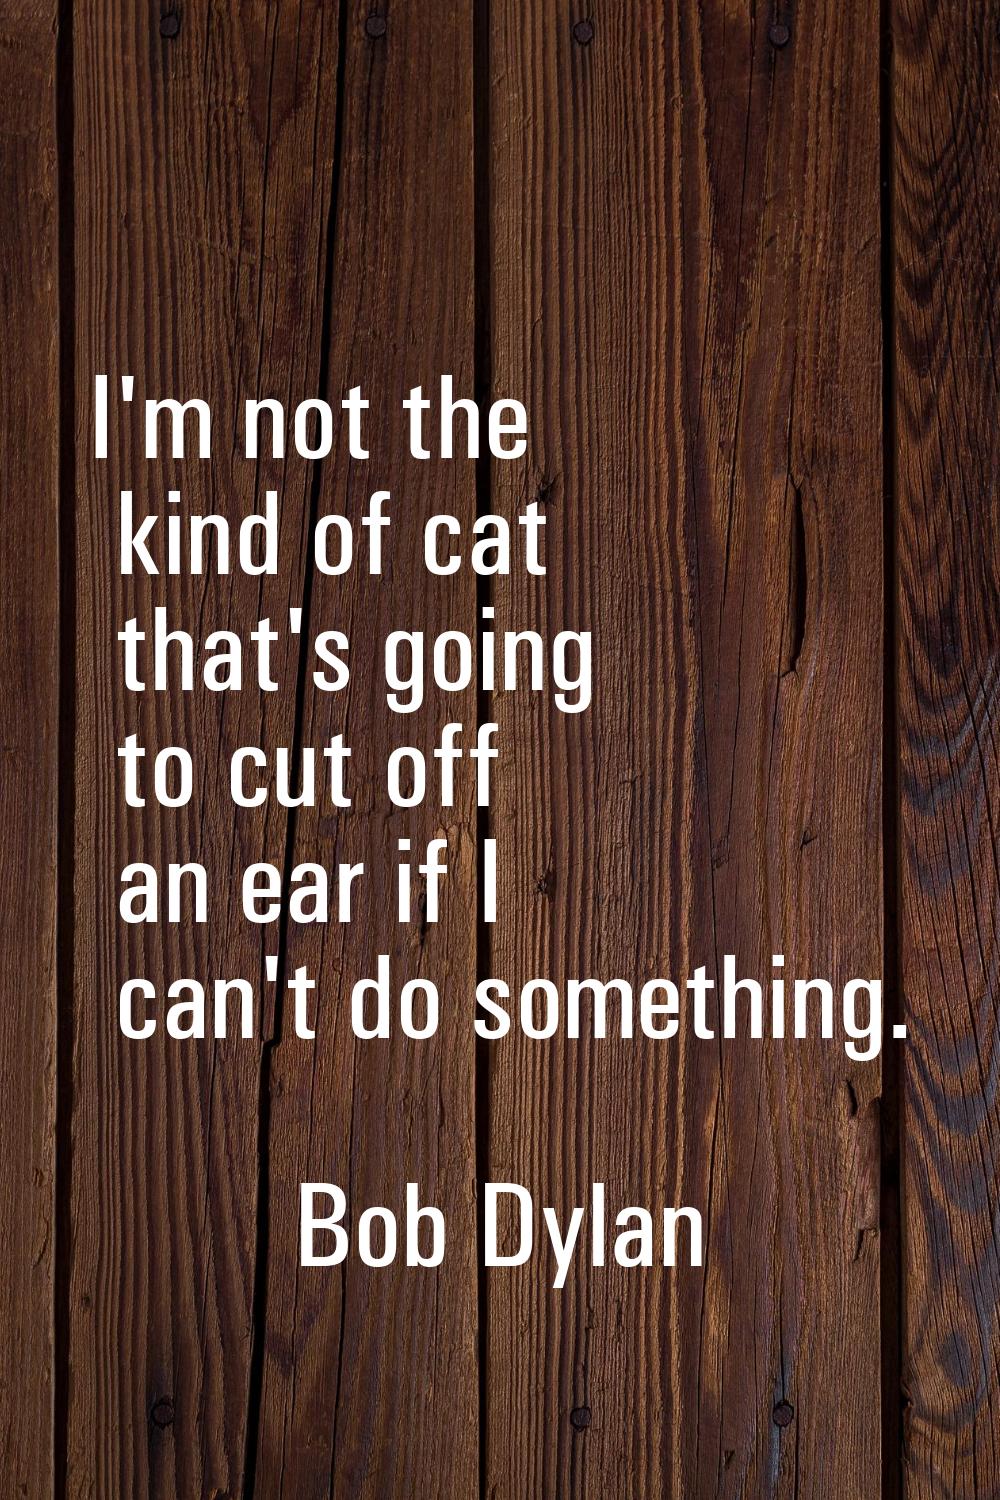 I'm not the kind of cat that's going to cut off an ear if I can't do something.